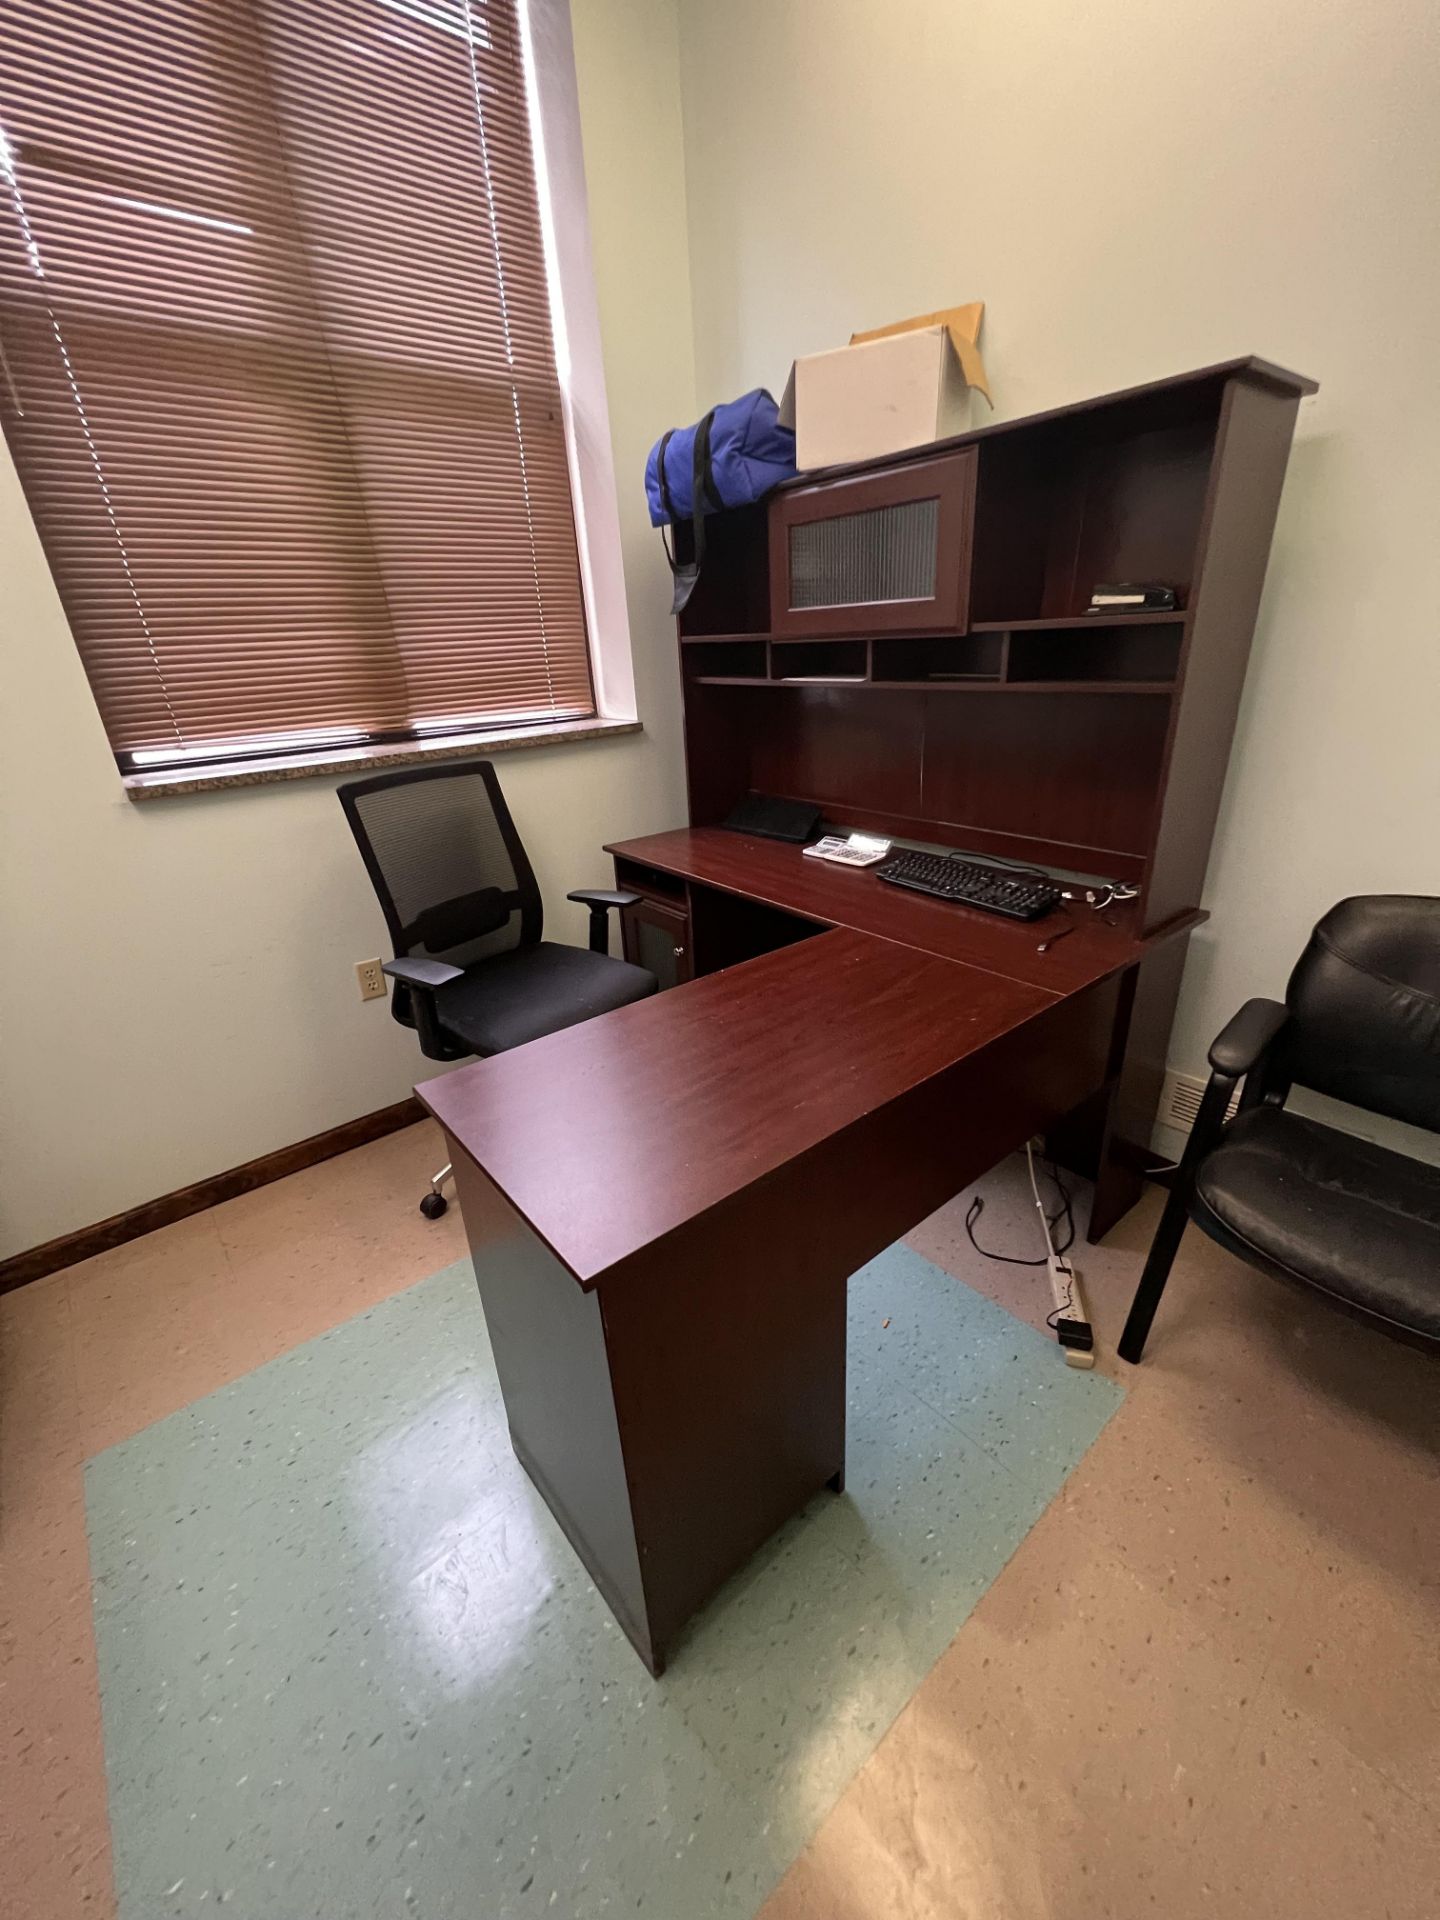 CONTENTS OF OFFICE, INCLUDES DESK, CABINETS, CHAIRS, ETC, DOES NOT INCLUDE PHONE OR COMPUTER - Image 2 of 4